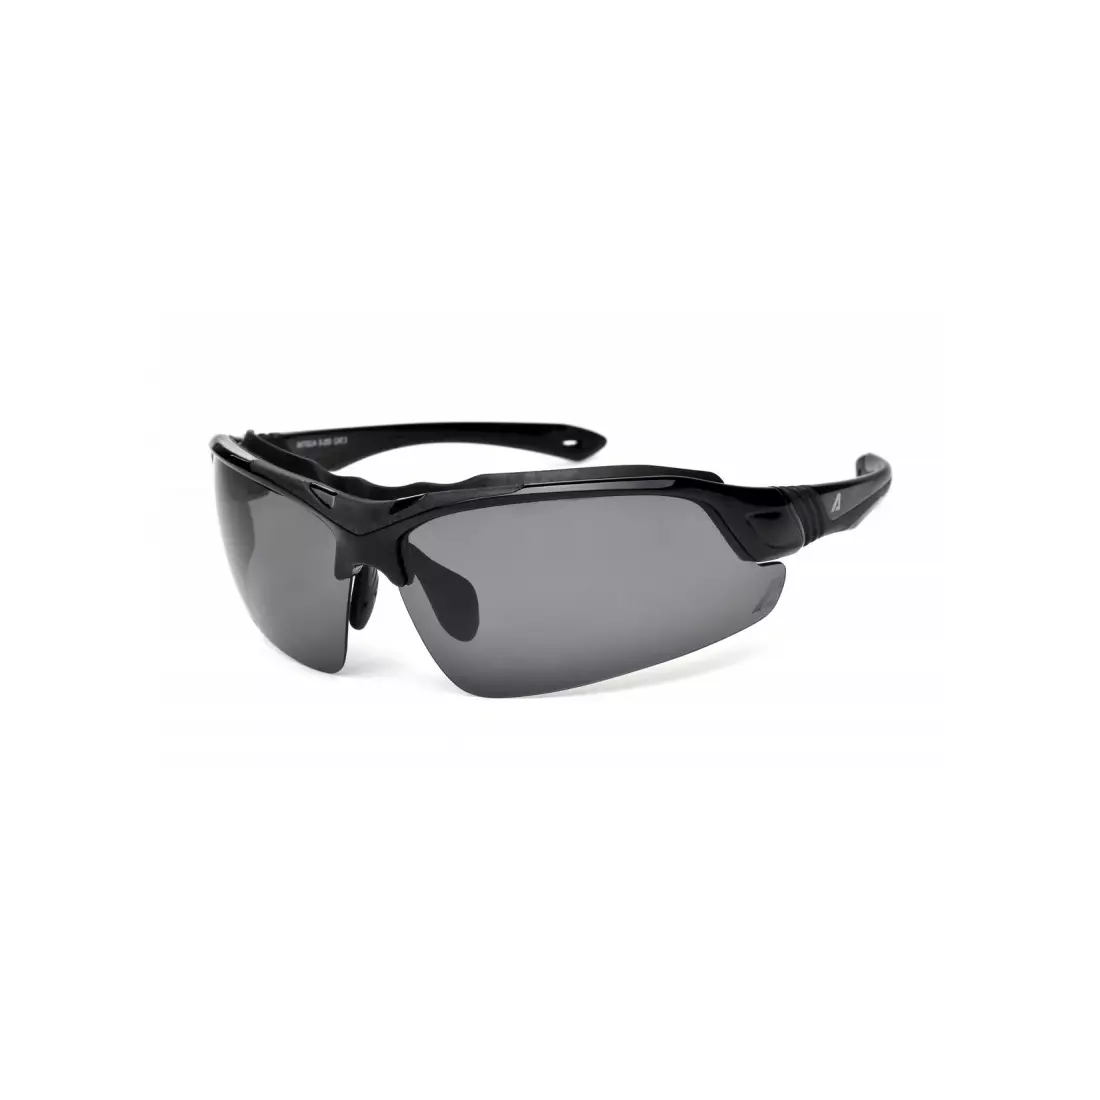 ARCTICA cycling/sports glasses, S 253